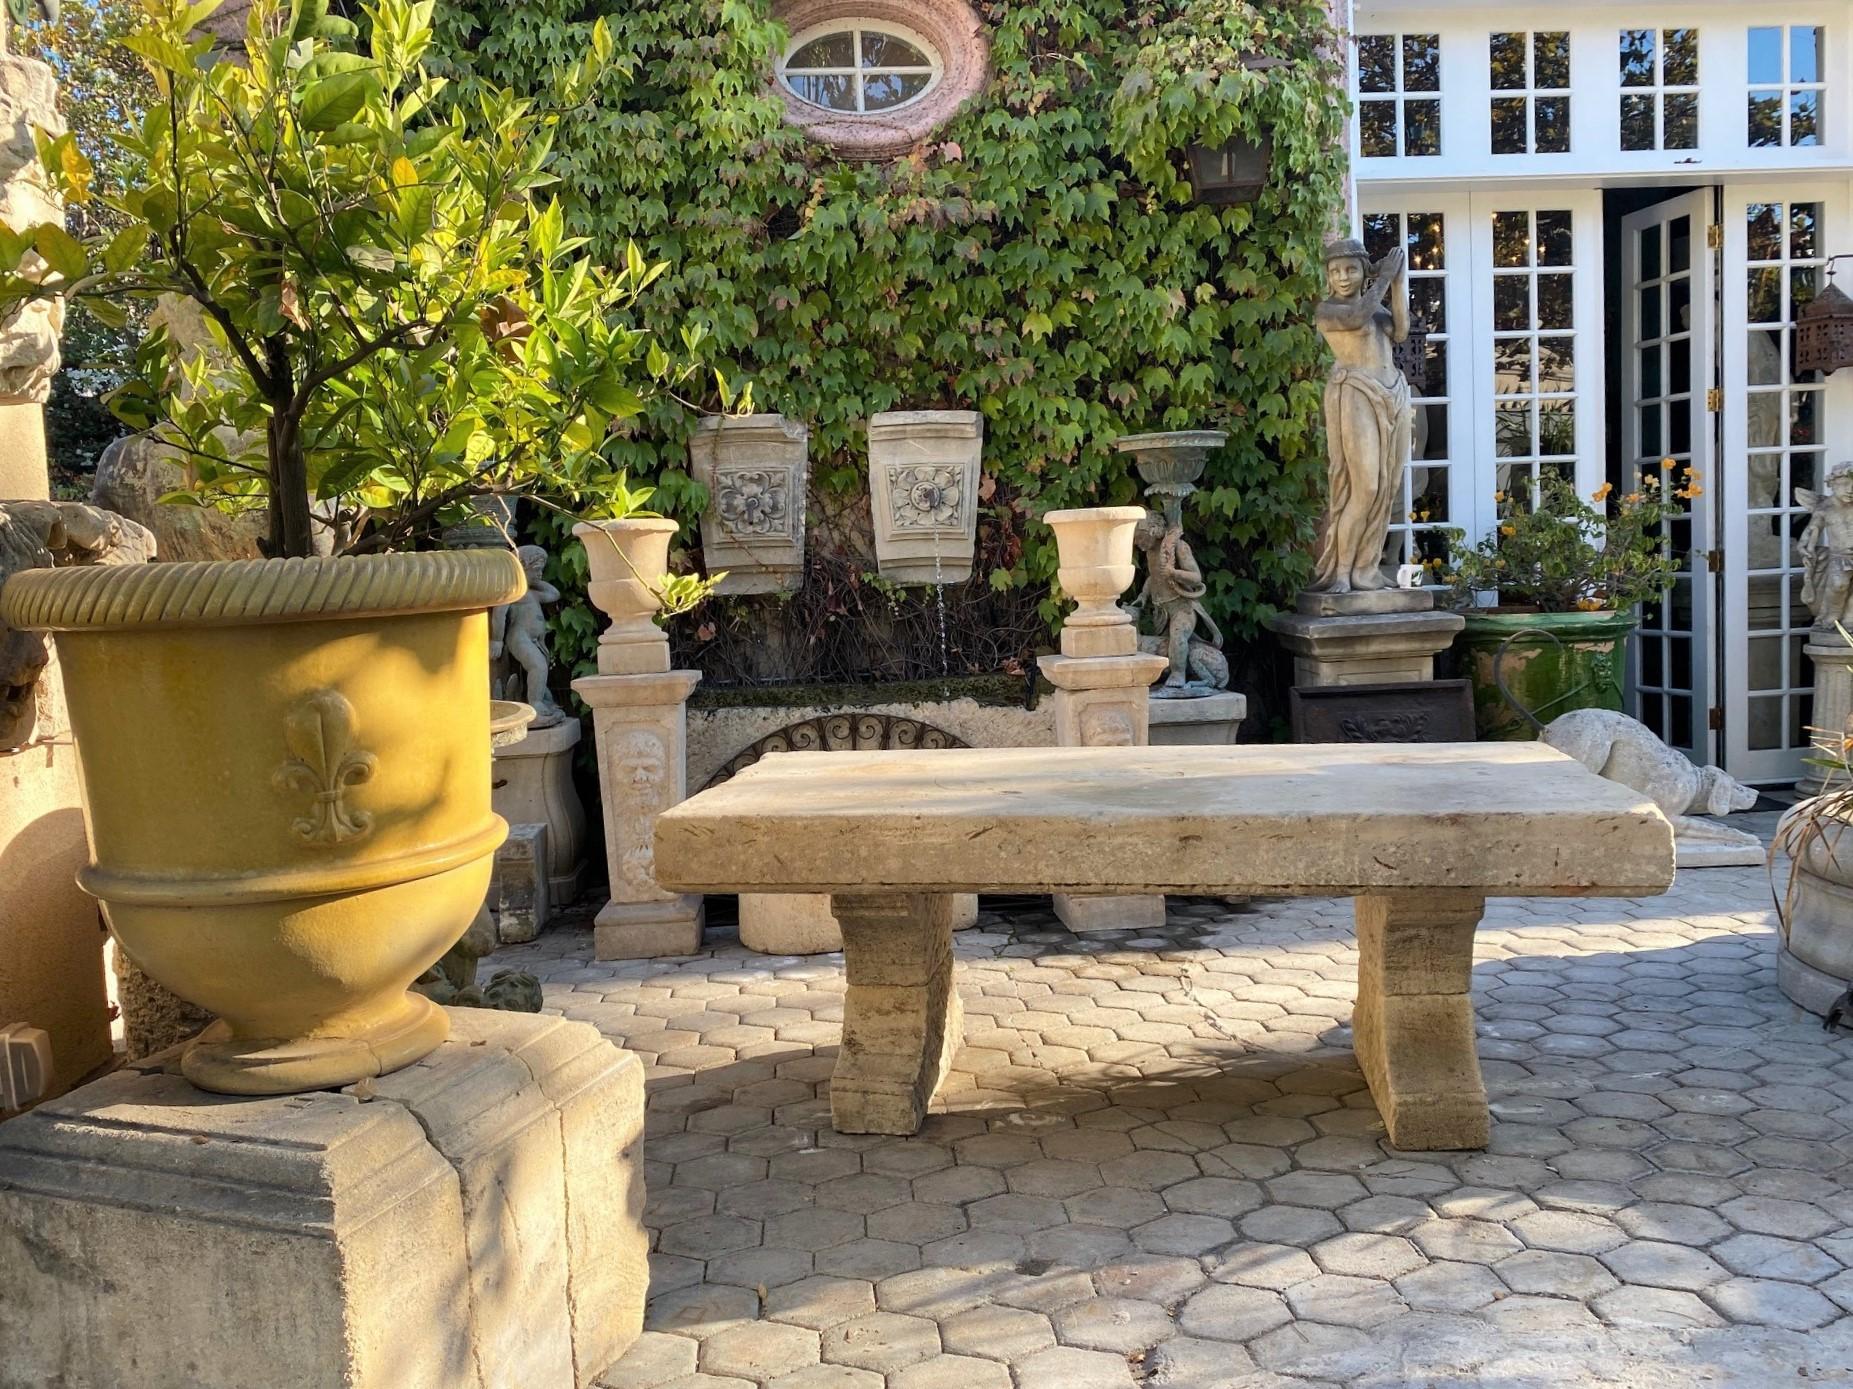 Large carved stone antique garden outdoor indoor dining coffee table farm rustic. 19th century beautifully carved stone table with Top Stone slab about 7” Thick It sits 8 - 10 people, It could be turned into a large low coffee table by Adjusting the